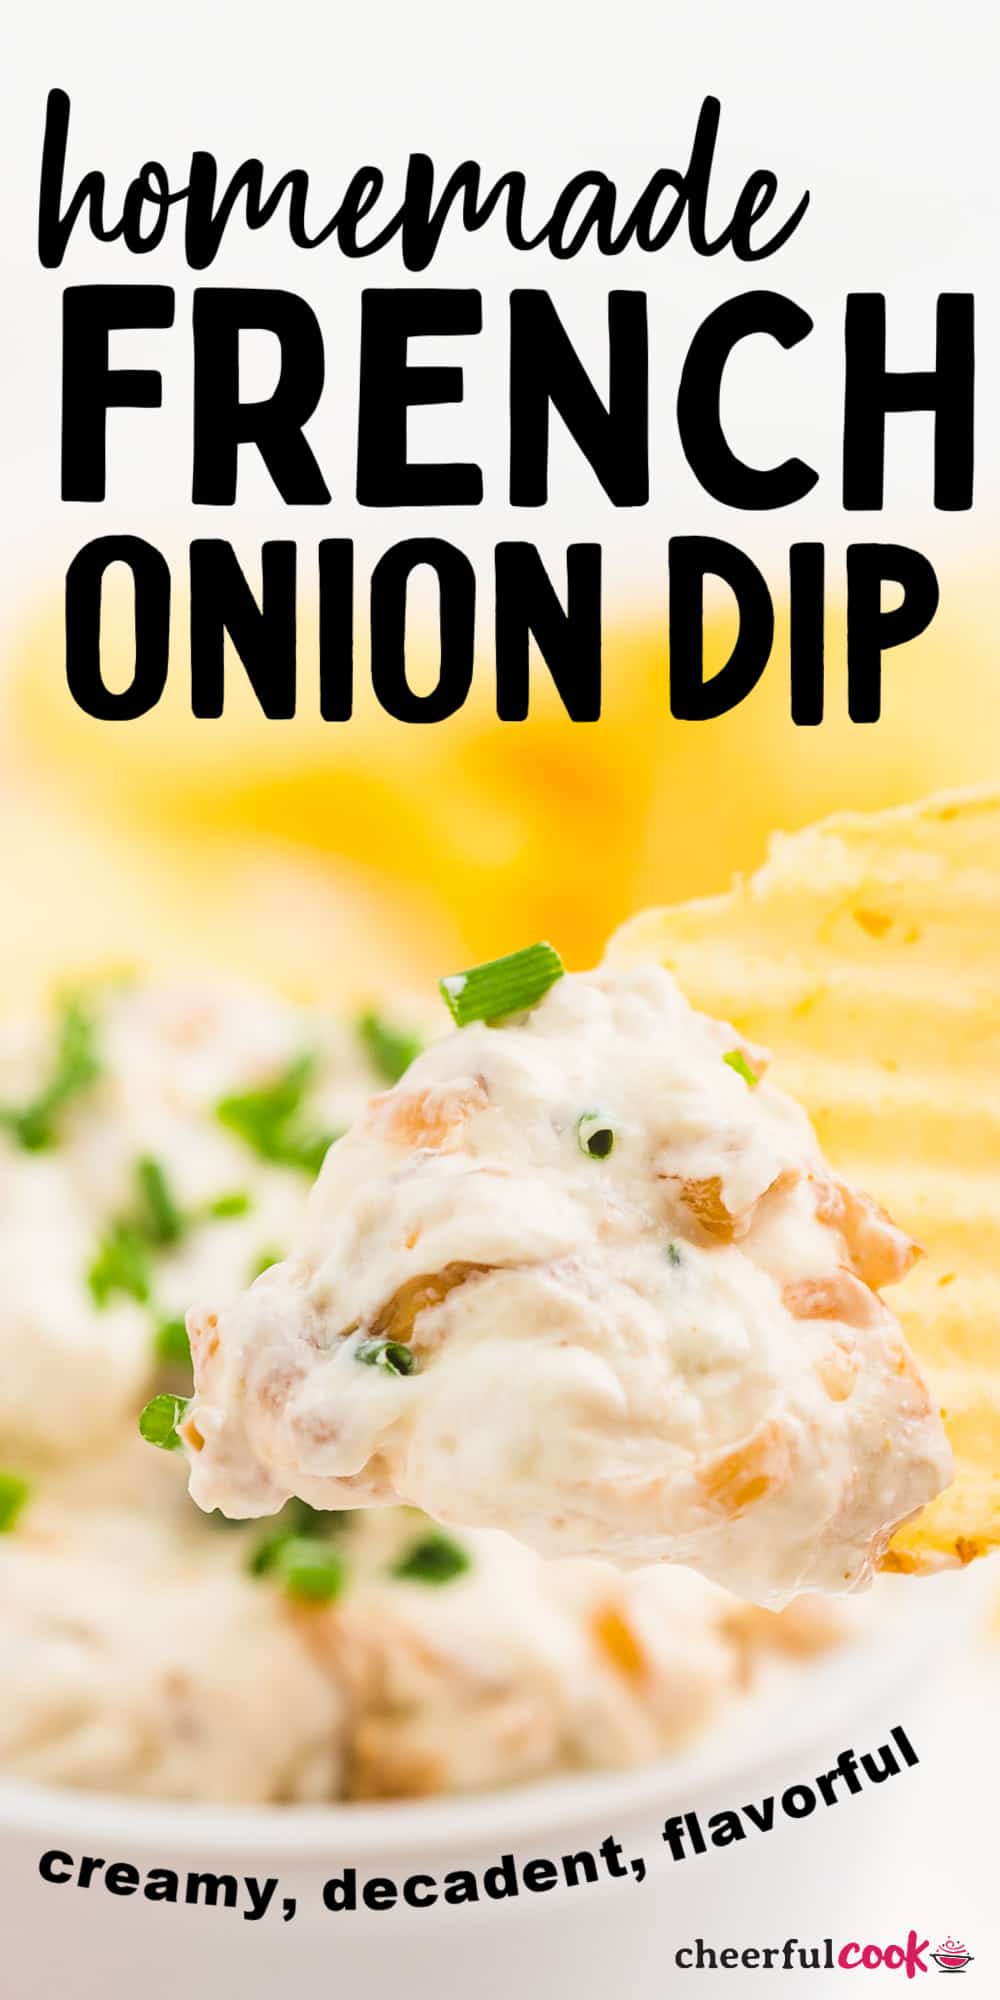 This classic dip will quickly become your new favorite appetizer recipe! It's creamy, sweet, tangy, and full of flavor from caramelized onions. A versatile dish that pairs well with everything from veggies to chips! #cheerfulcook #dip #frenchonion #recipe #easy via @cheerfulcook